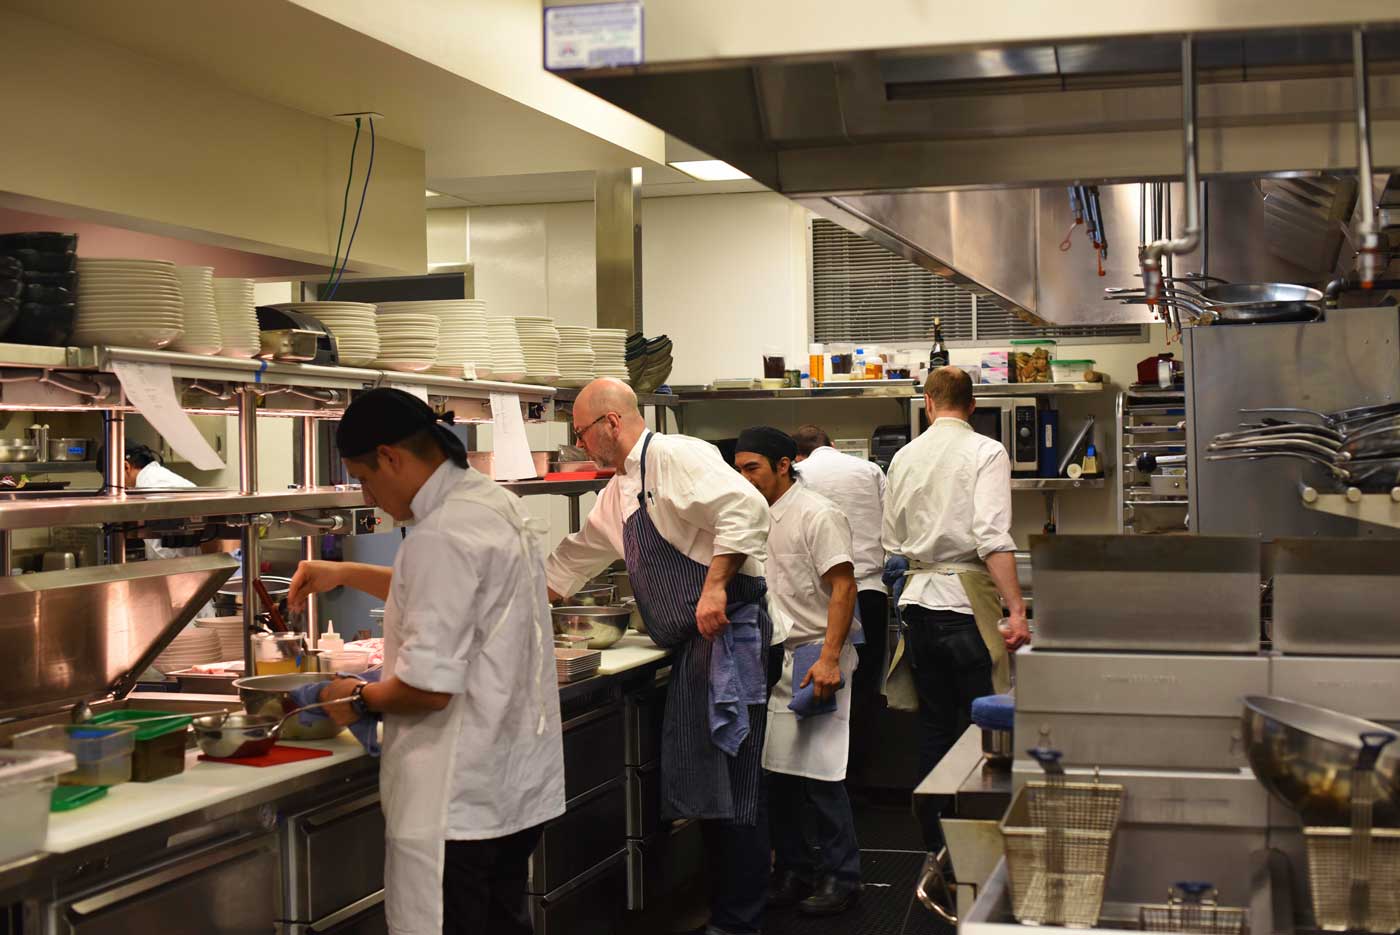 The large kitchen at Volta has the same airy, clean feel of the dining room.